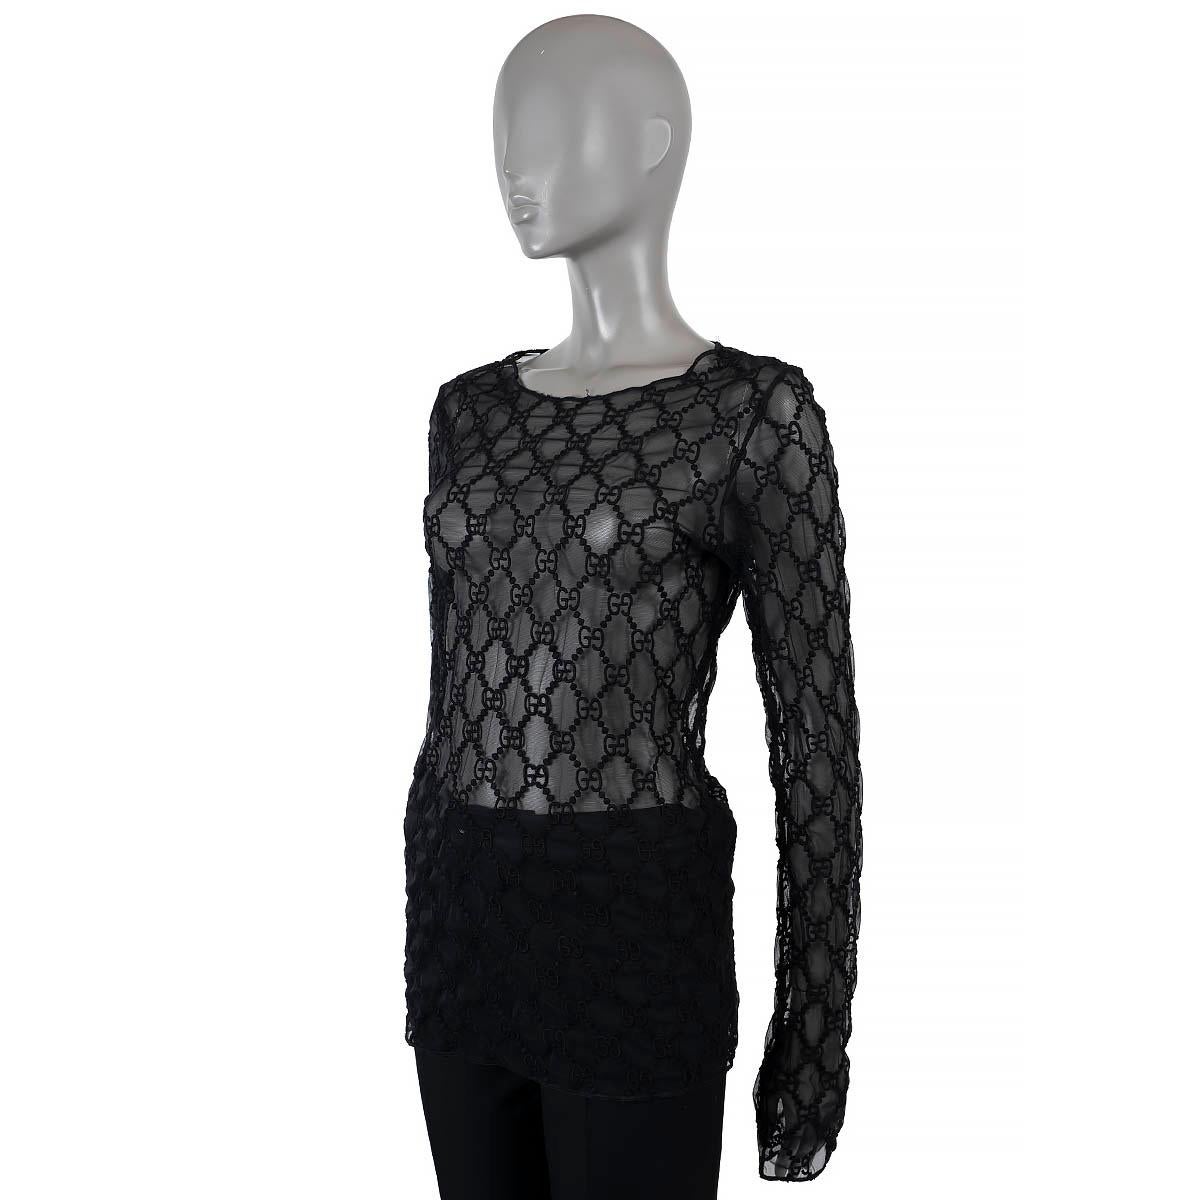 100% authentic Gucci GG embroidered sheer mesh top in black cotton (54%), polyamide (31%), polyester (9%) and elastane (6%). Features a round neck and long sleeves. Brand new.

Measurements
Tag Size	M
Size	M
Shoulder Width	41cm (16in)
Bust From	92cm